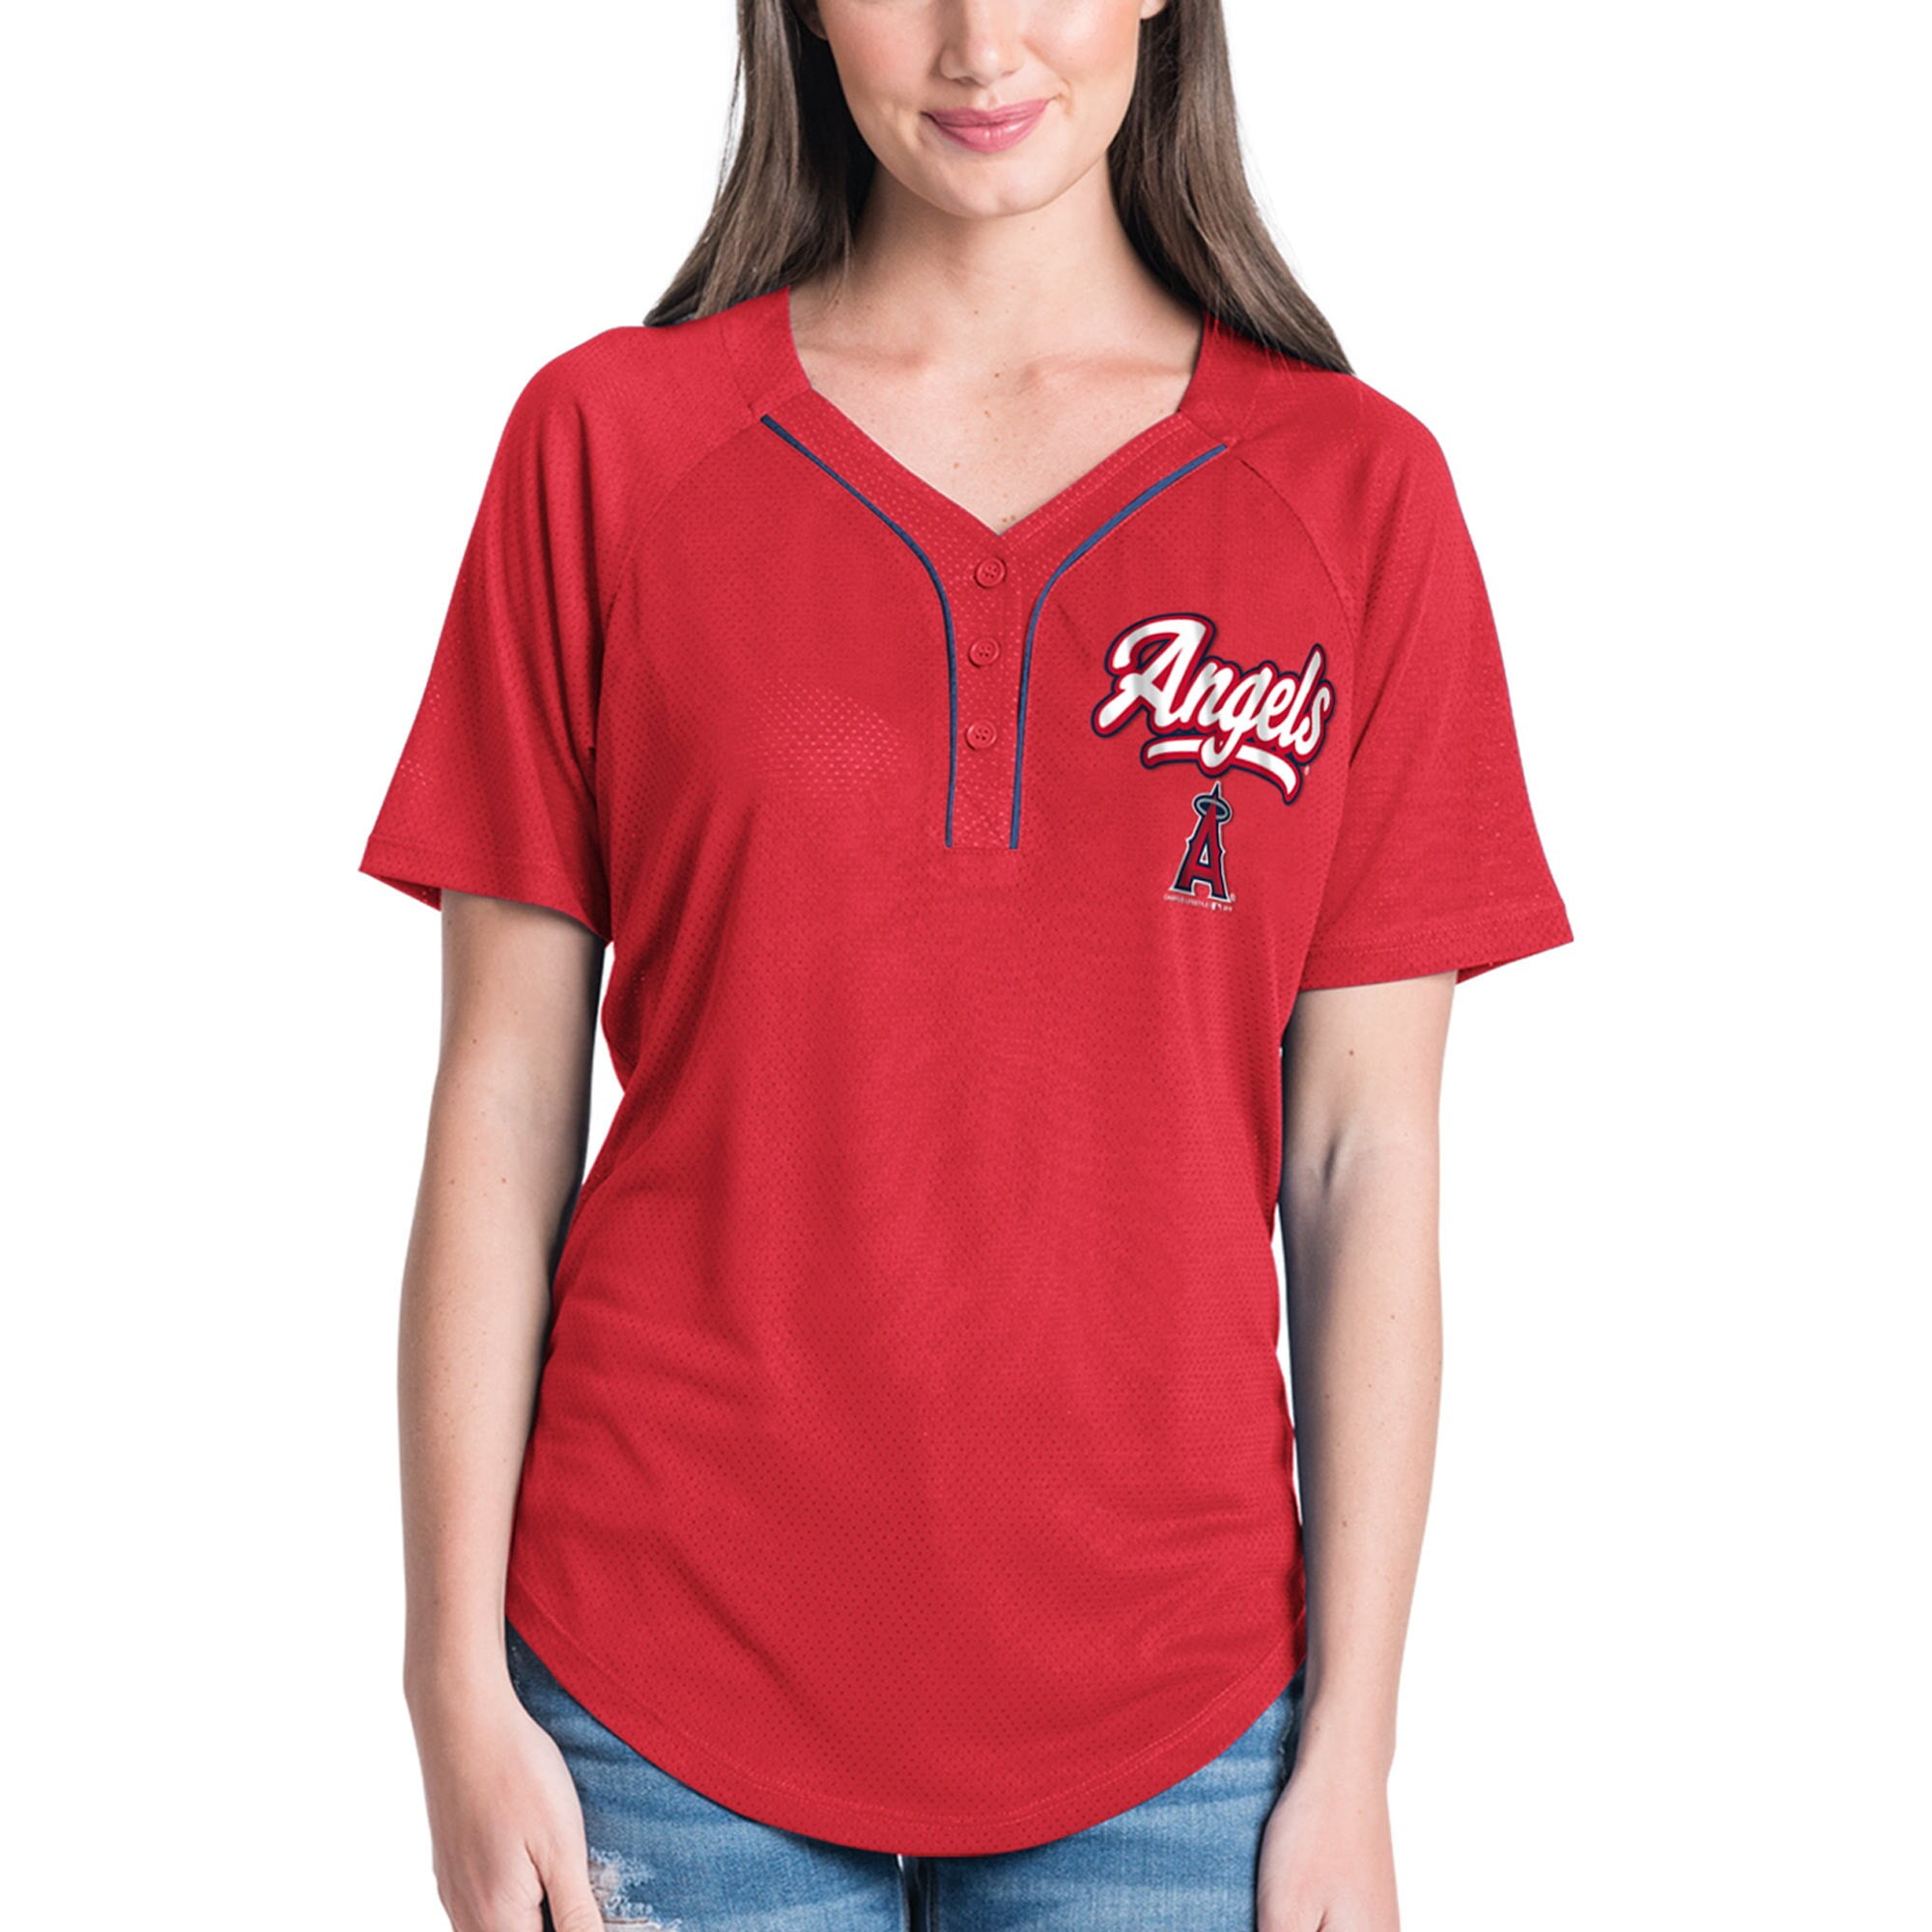 angels girl jersey